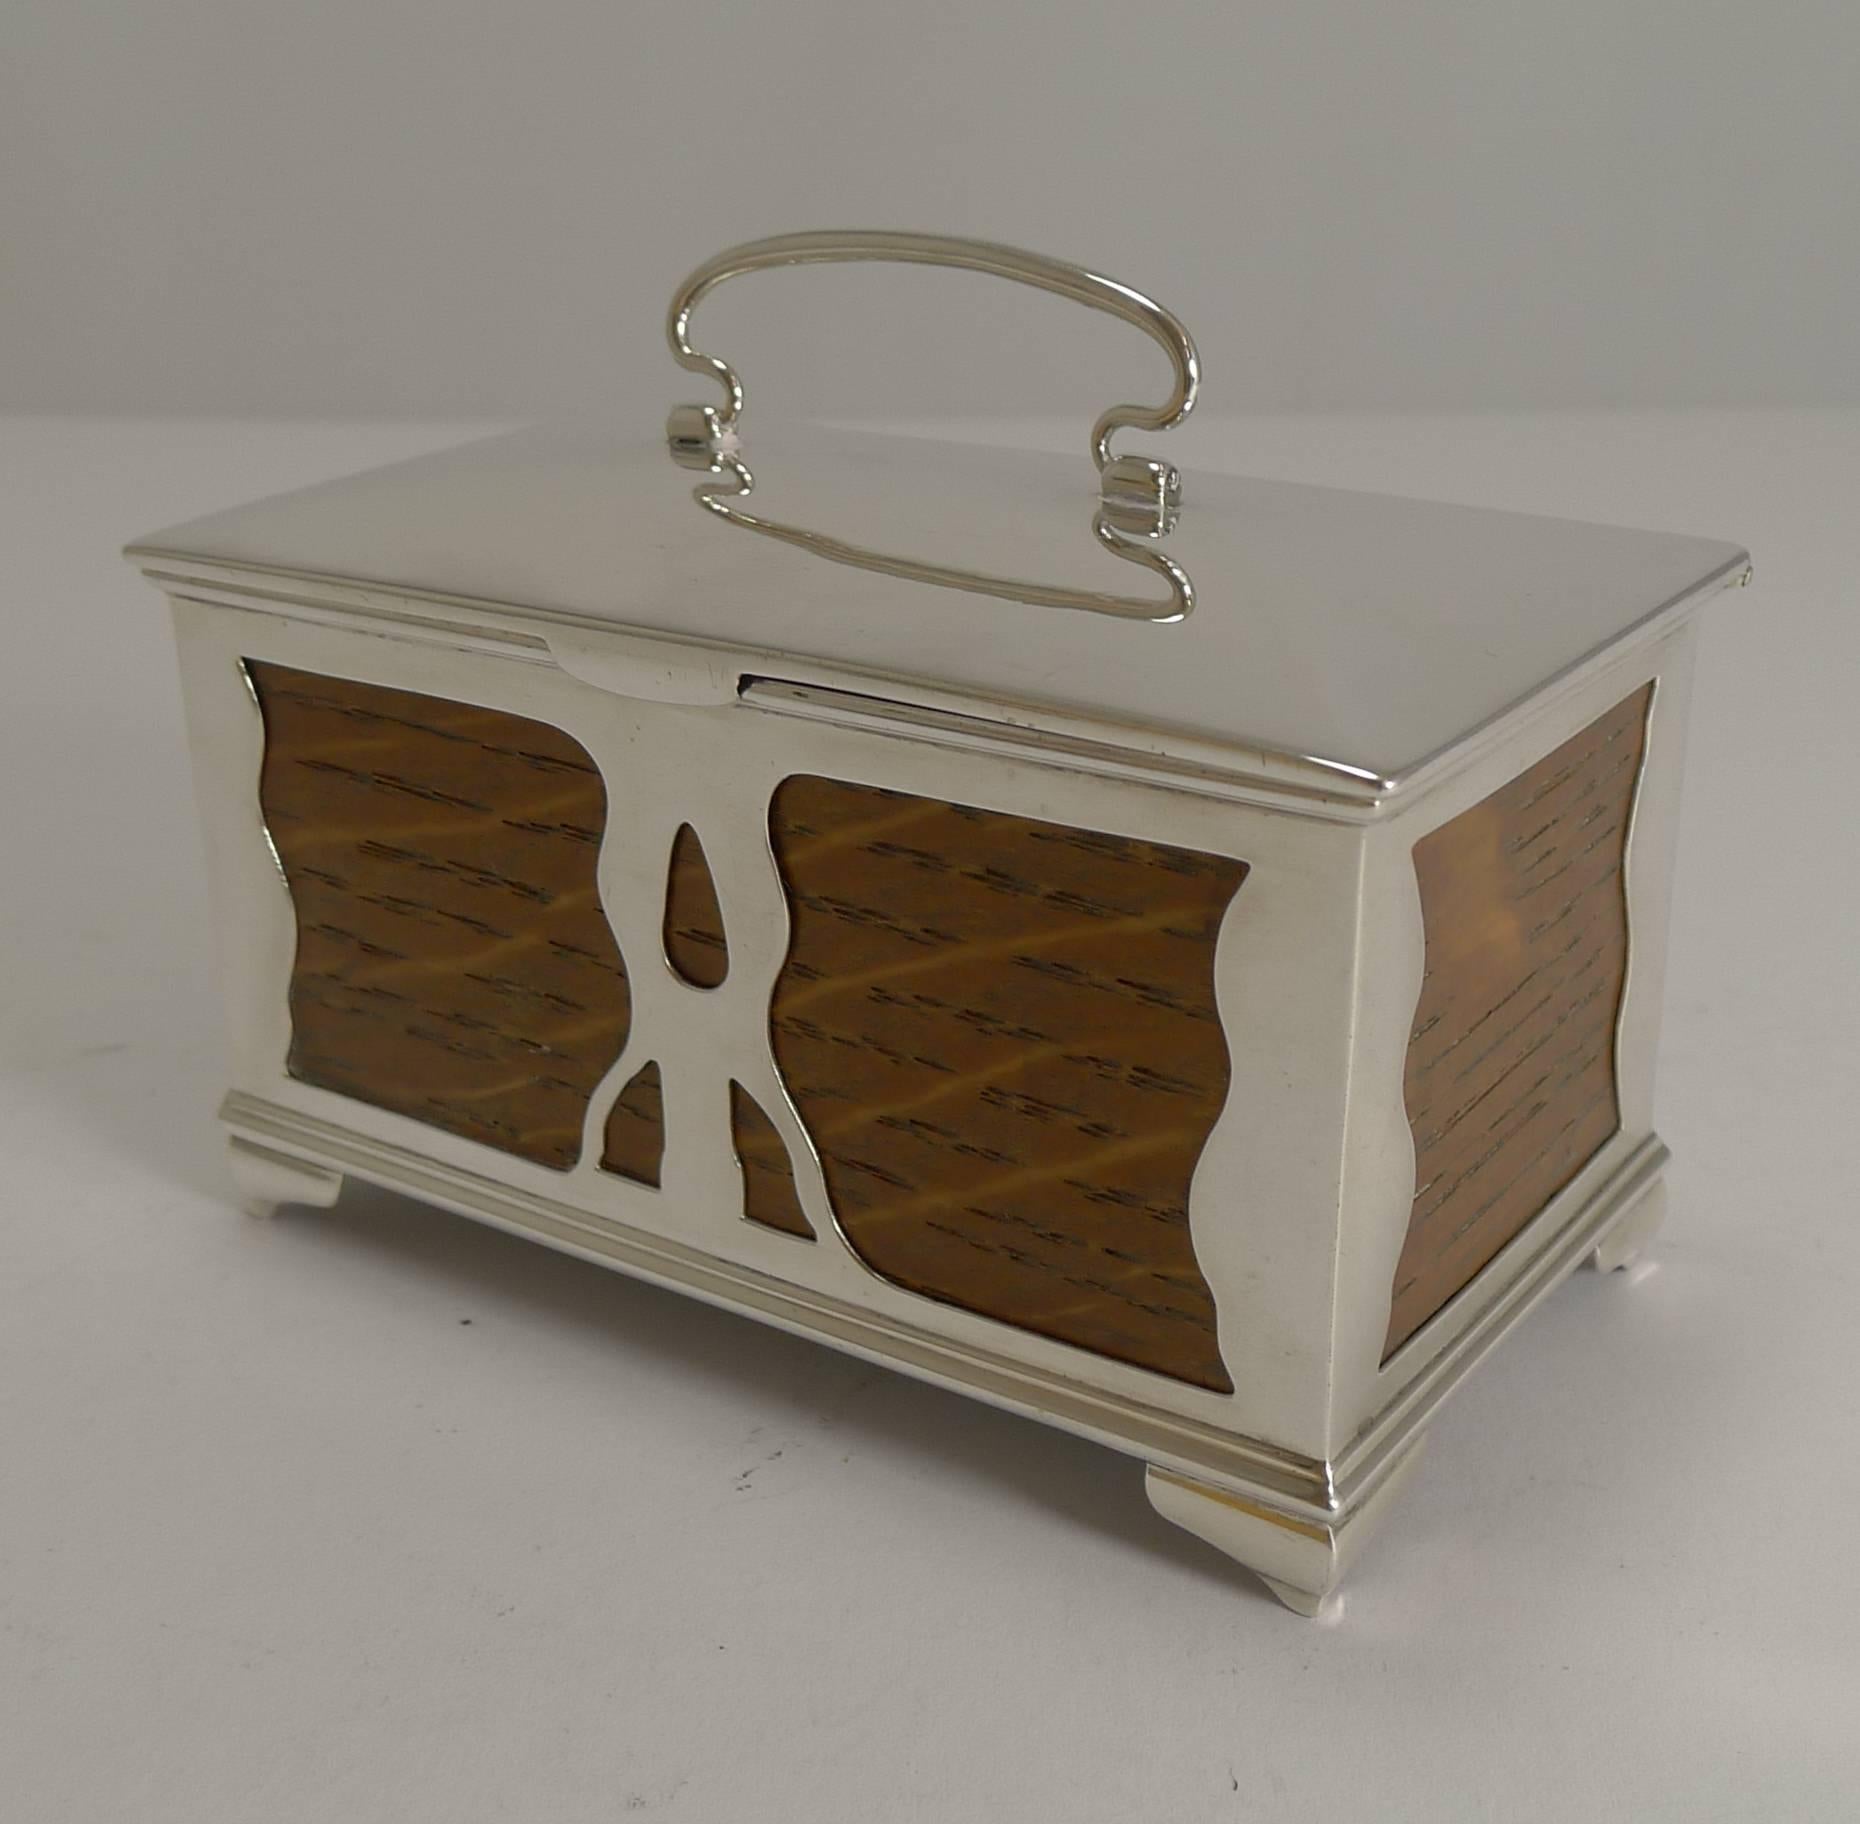 A magnificent Art Nouveau trinket box made from solid English oak and mounted with sterling silver.

Standing on four little feet, the underside is where the full English hallmark can be found for Birmingham 1904 together with the makers initials